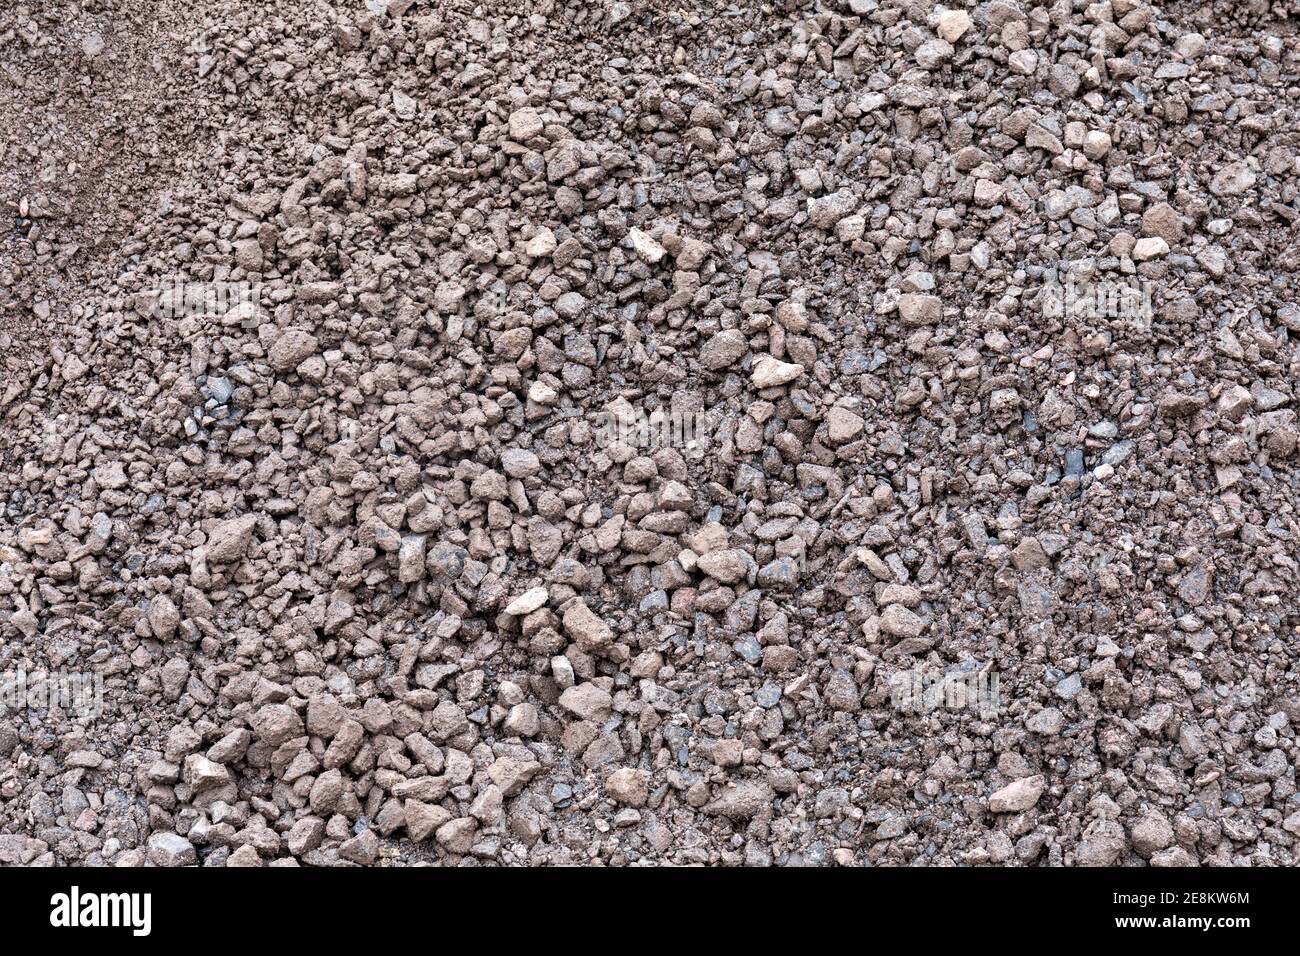 Close up of Type 1 sub base aggregate used as a construction material for sale at a Builders Merchants in England, UK Stock Photo